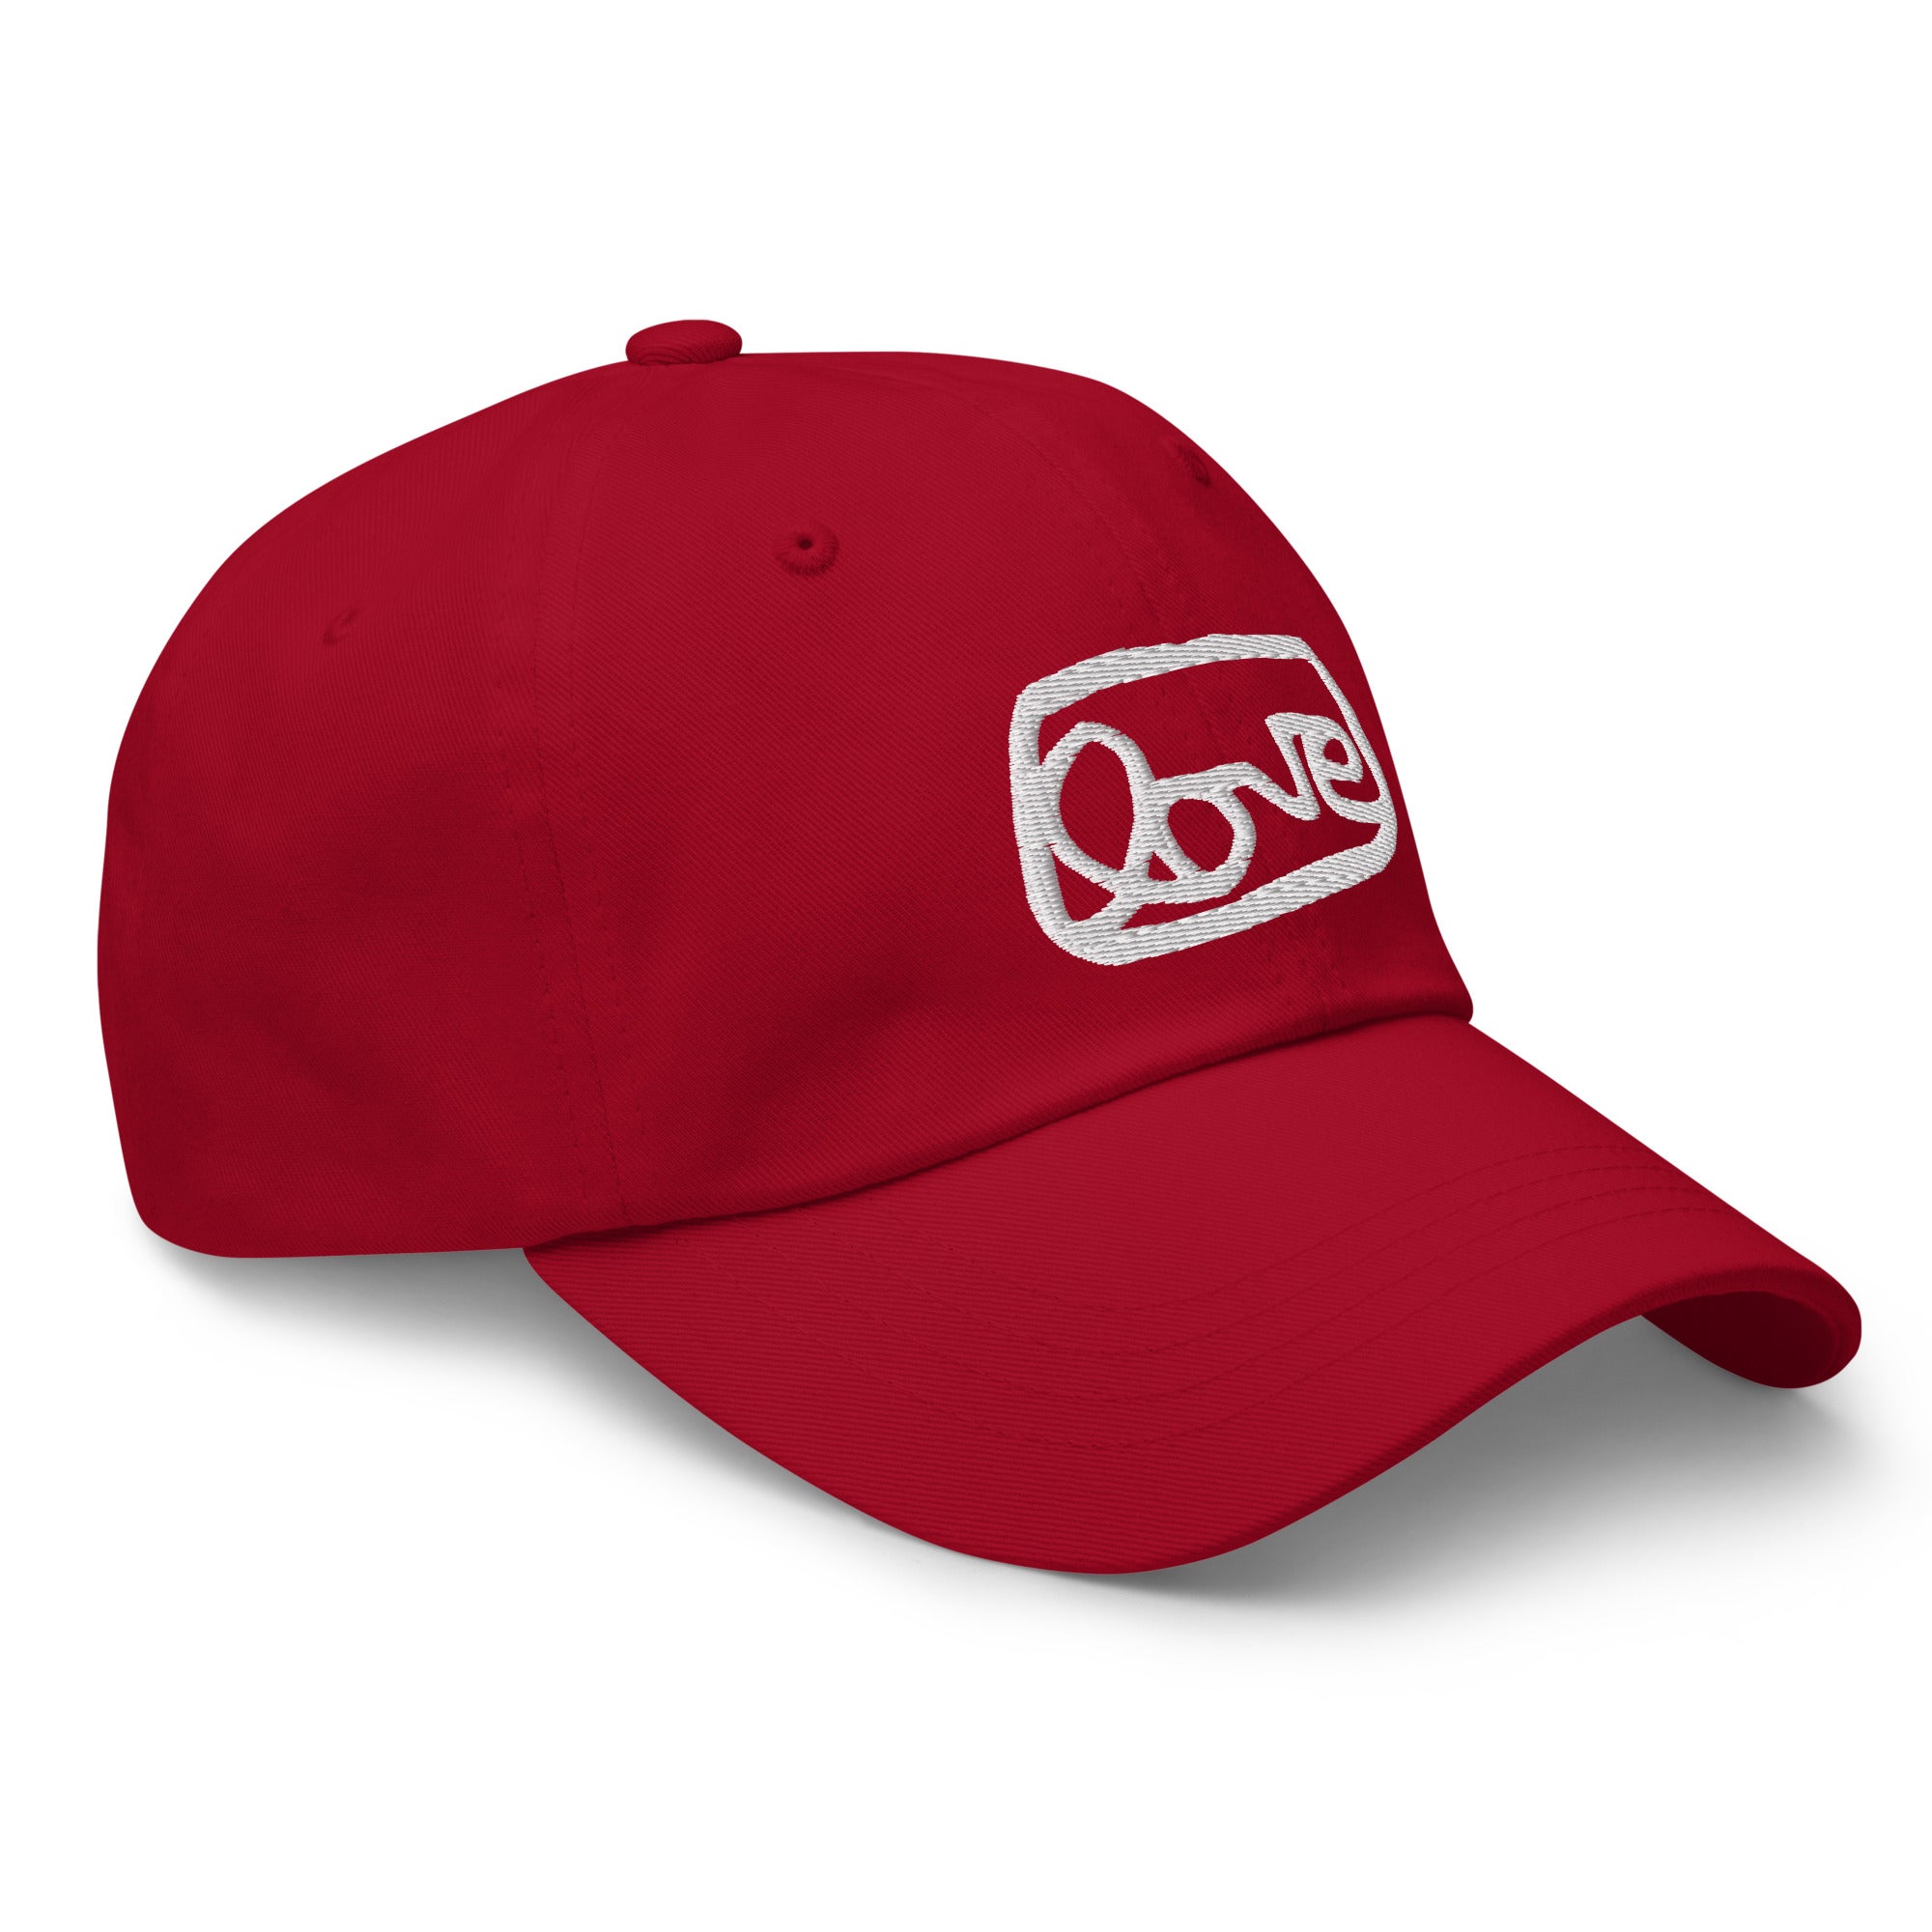 Embroidered LOVE dad hat - red